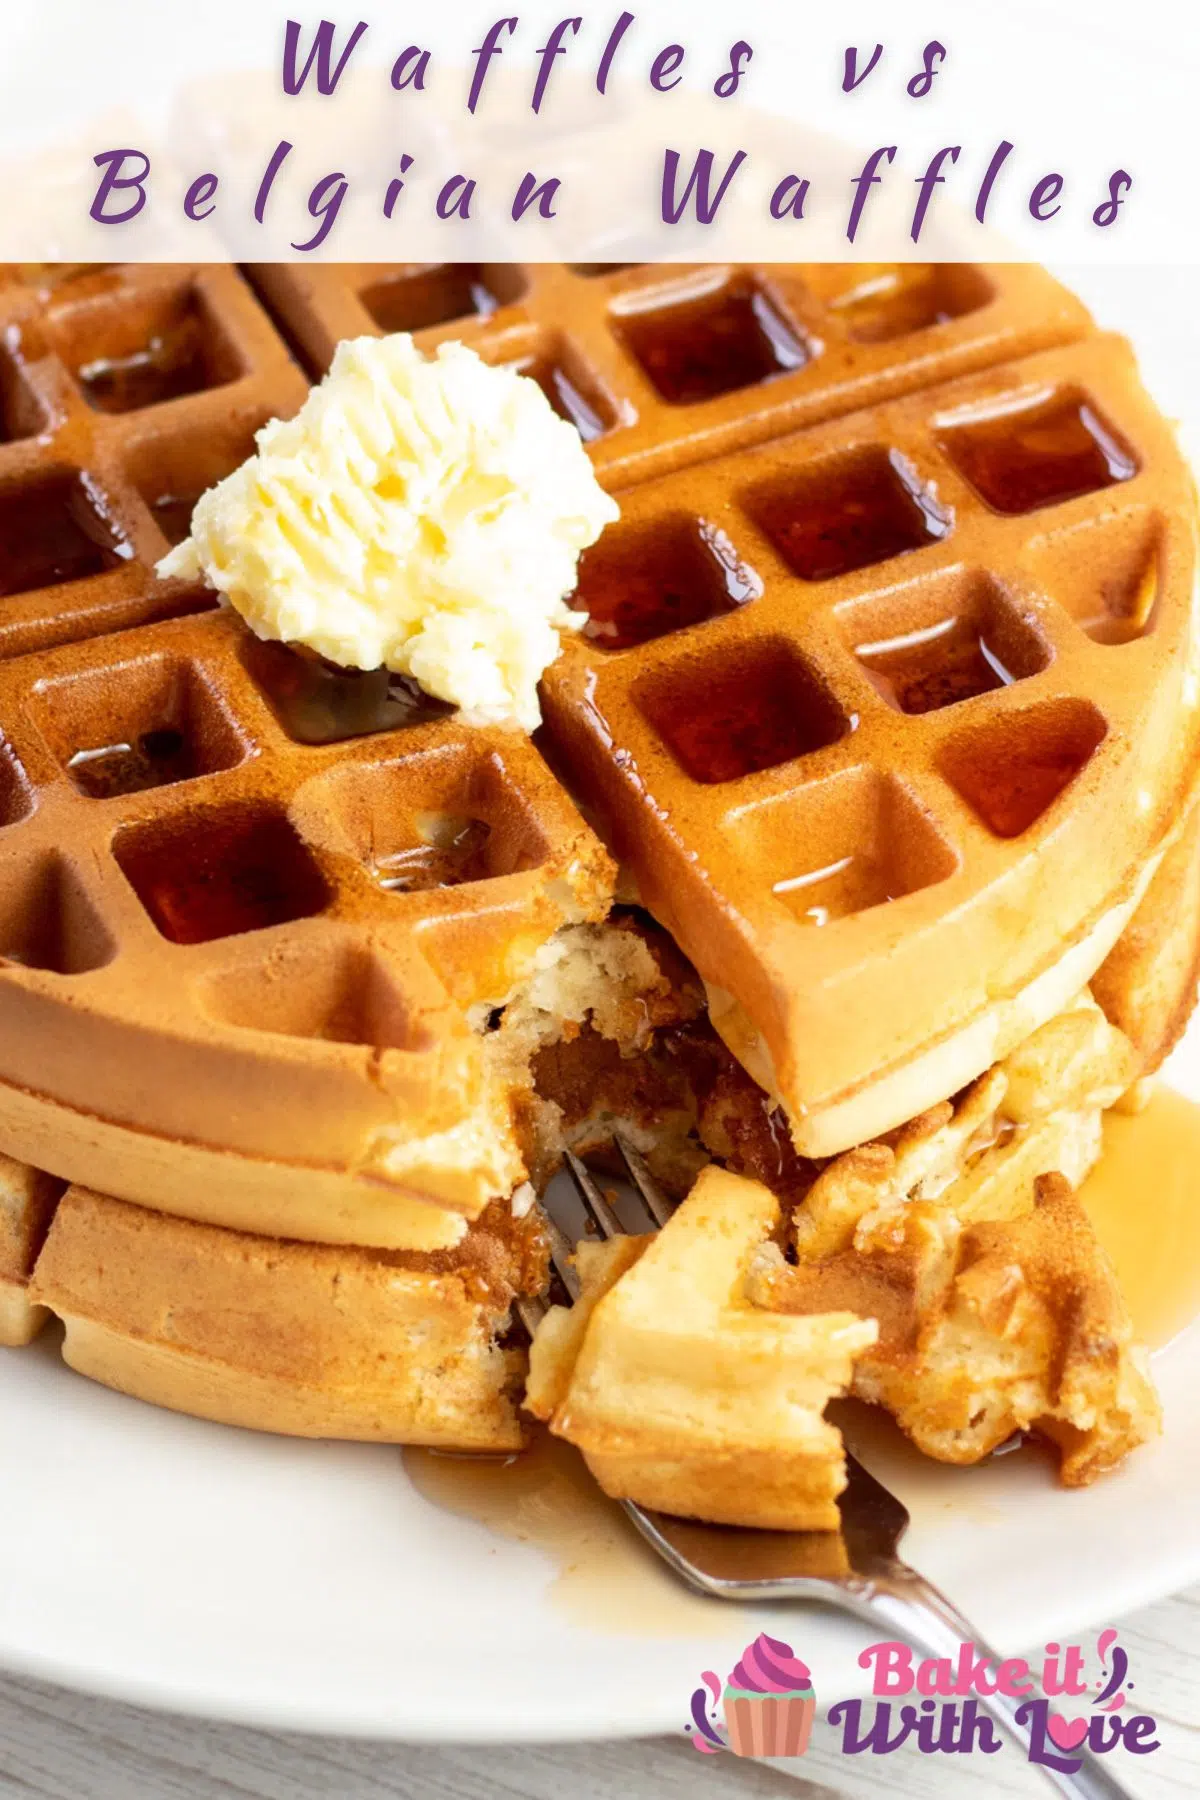 Pin image of waffles with text overlay.